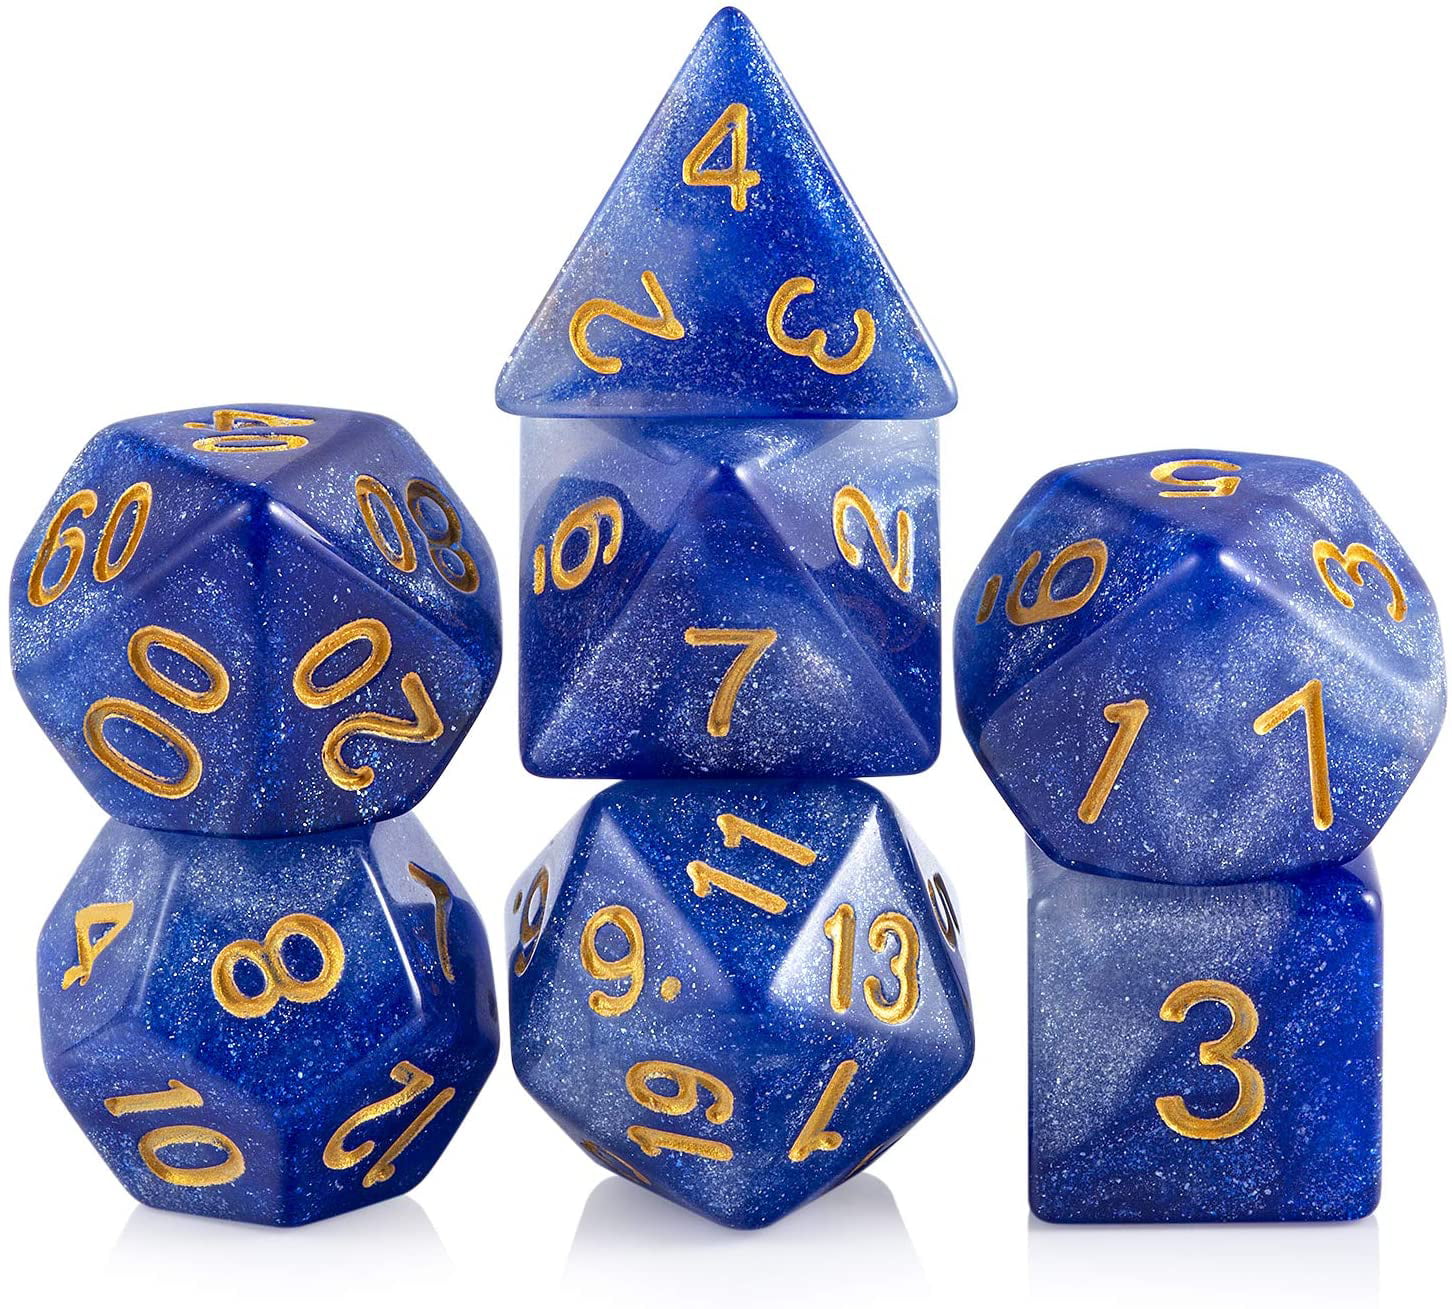 35 Pcs DD Dungeons And Dragons Dice 5 Sets RPG Games Die Dices with Pouch New 